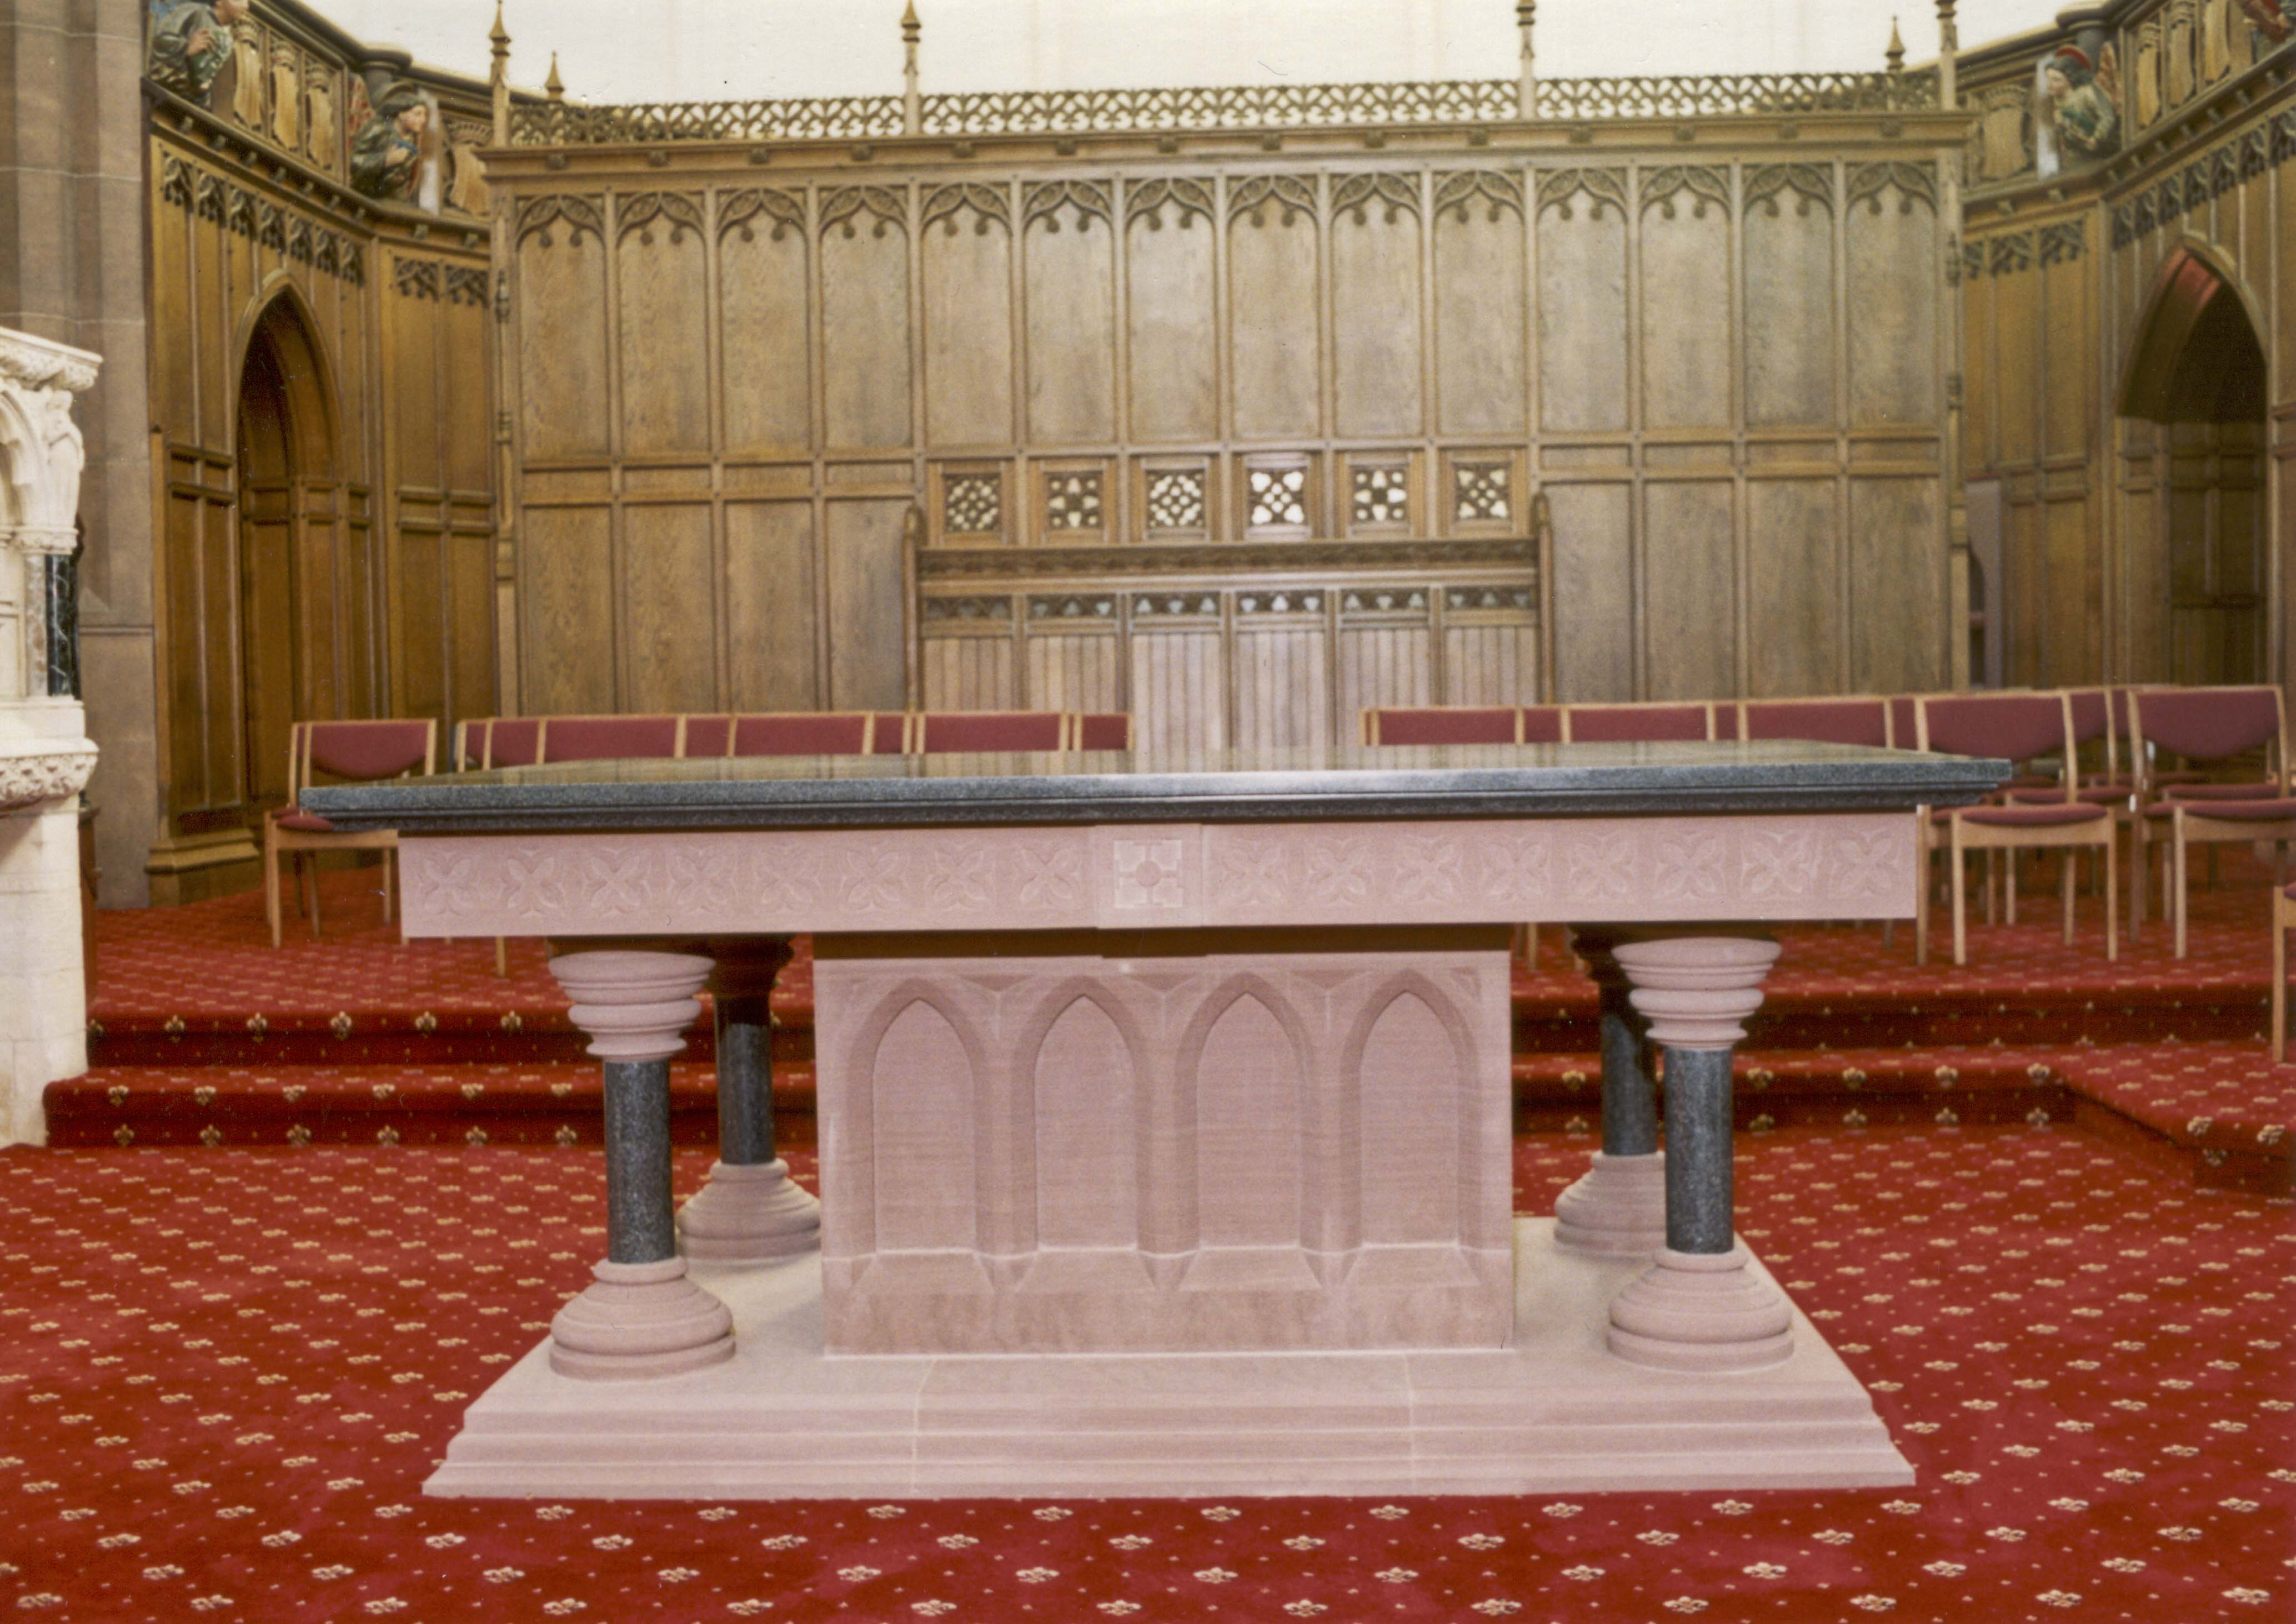 The new altar